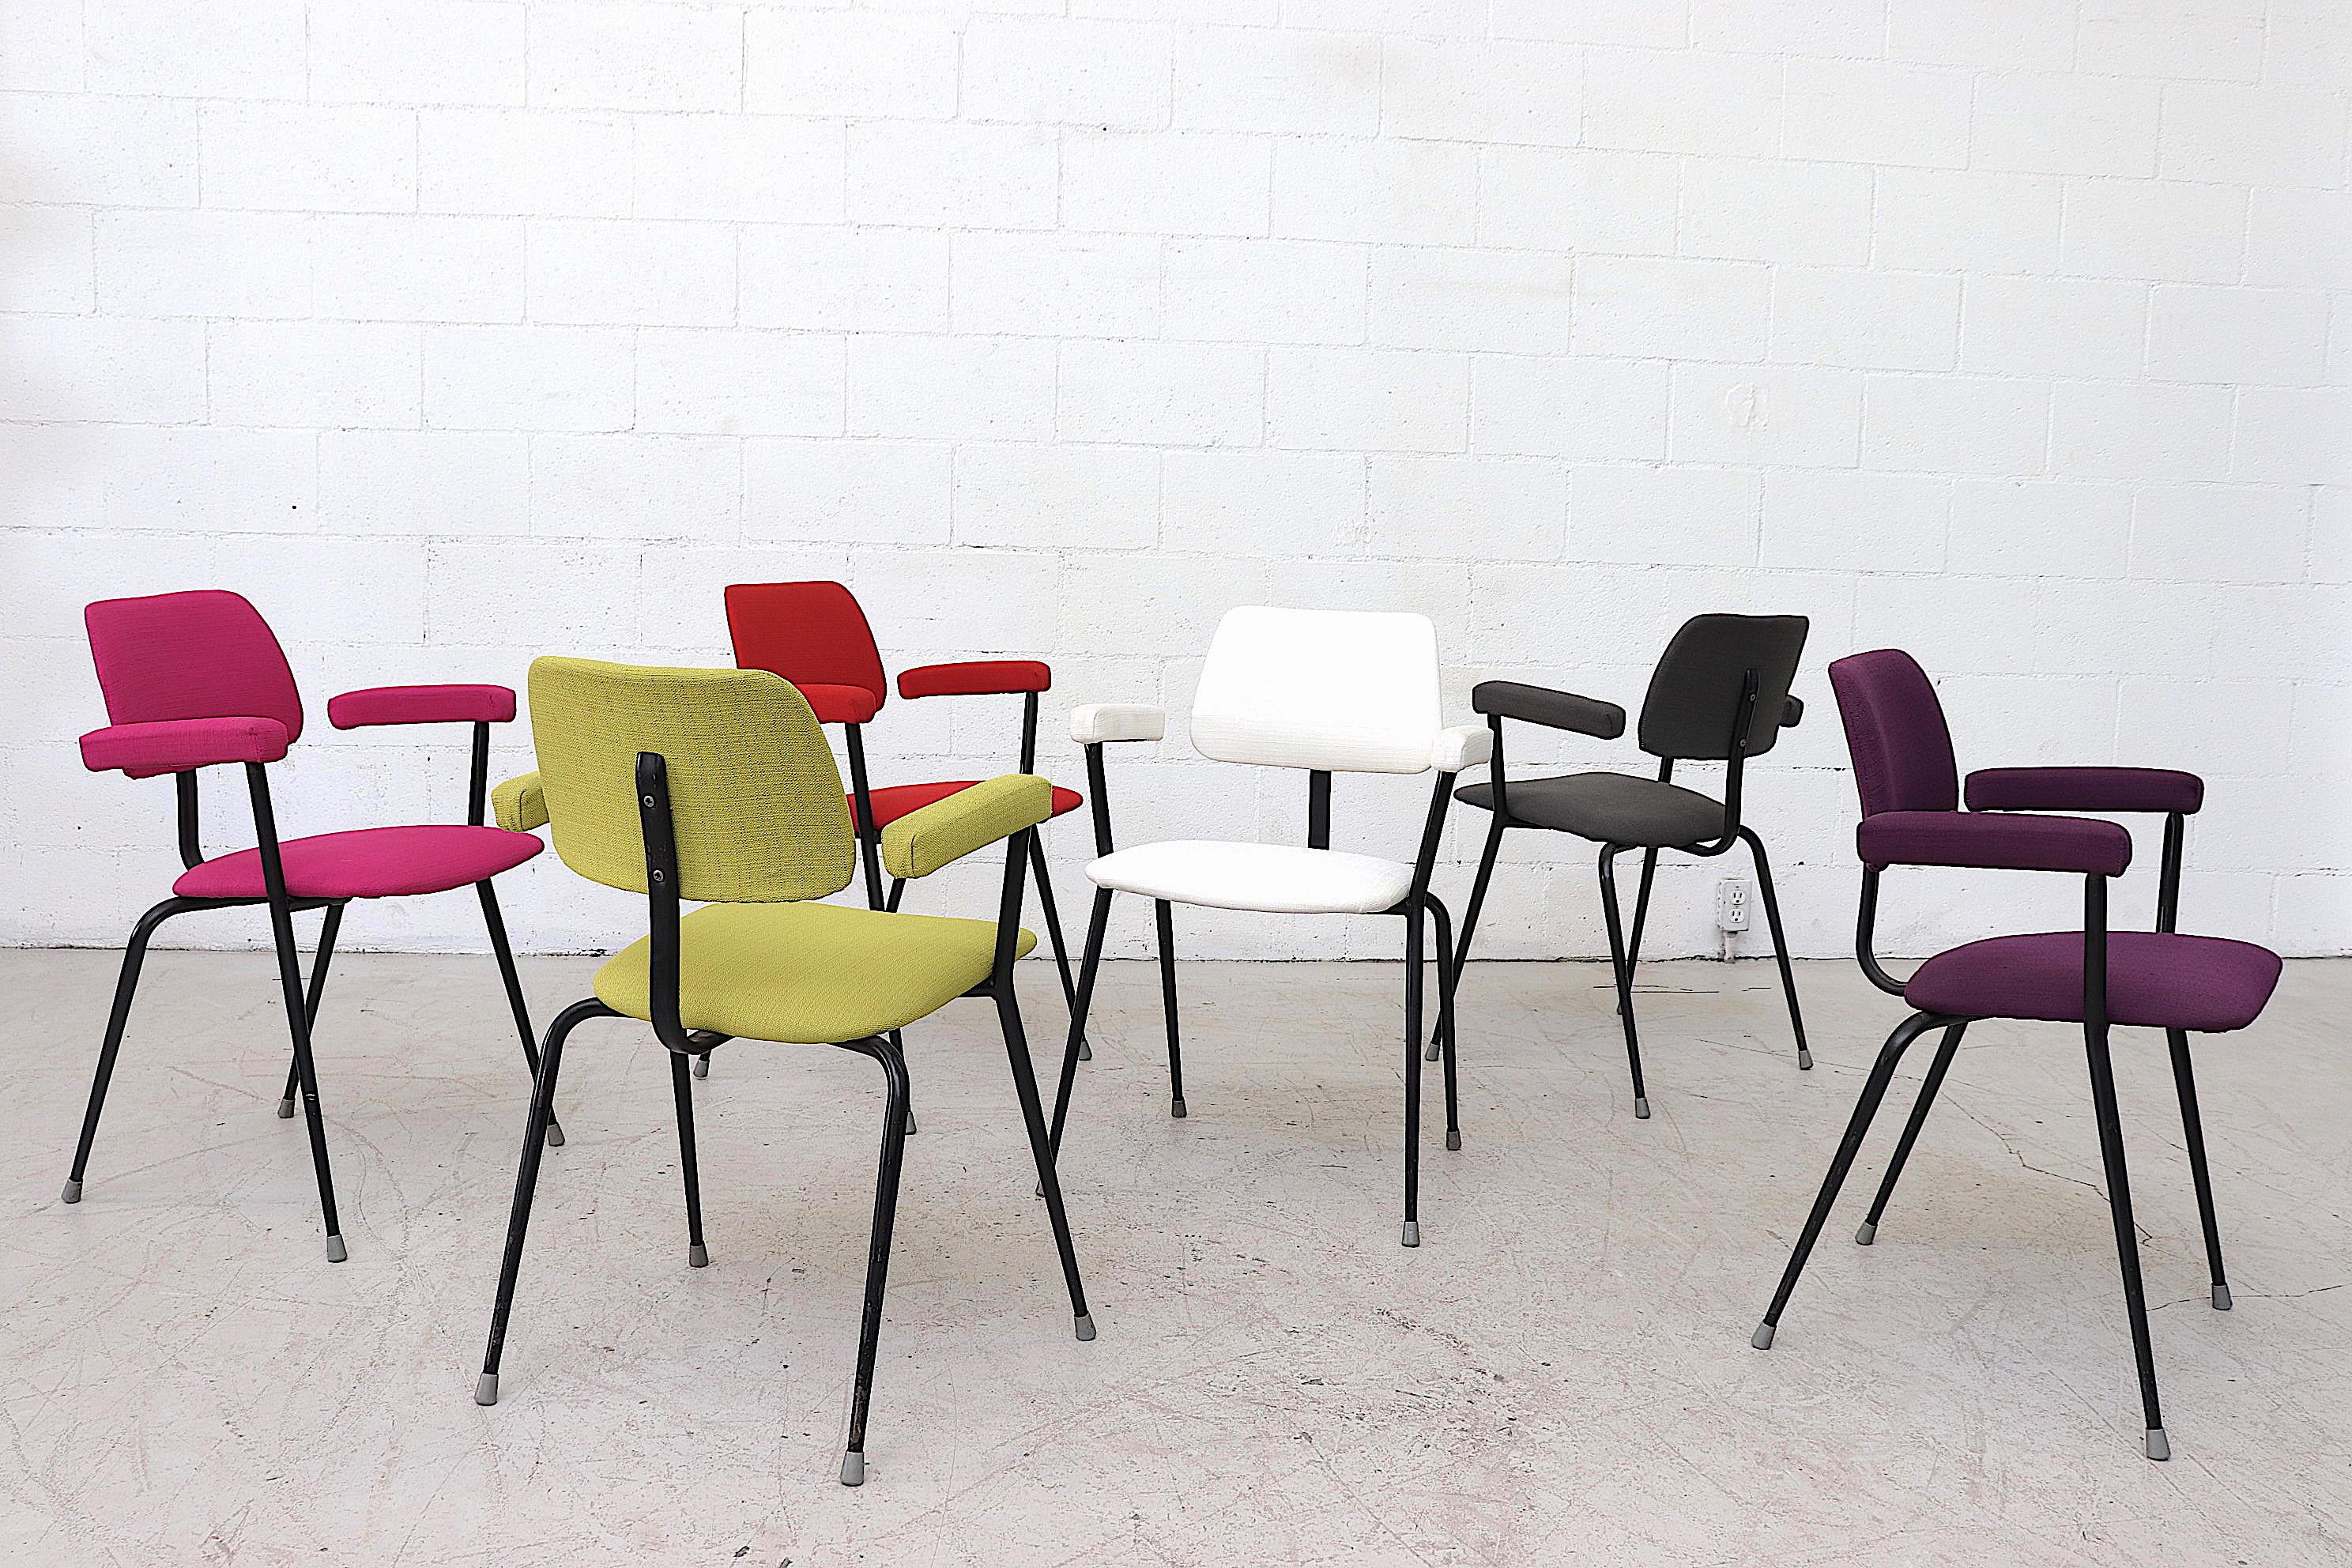 Set of 6 handsome tubular stacking chairs with brightly upholstered seat, back and arm rests. Frames are in original condition with visible signs of wear. Set price.